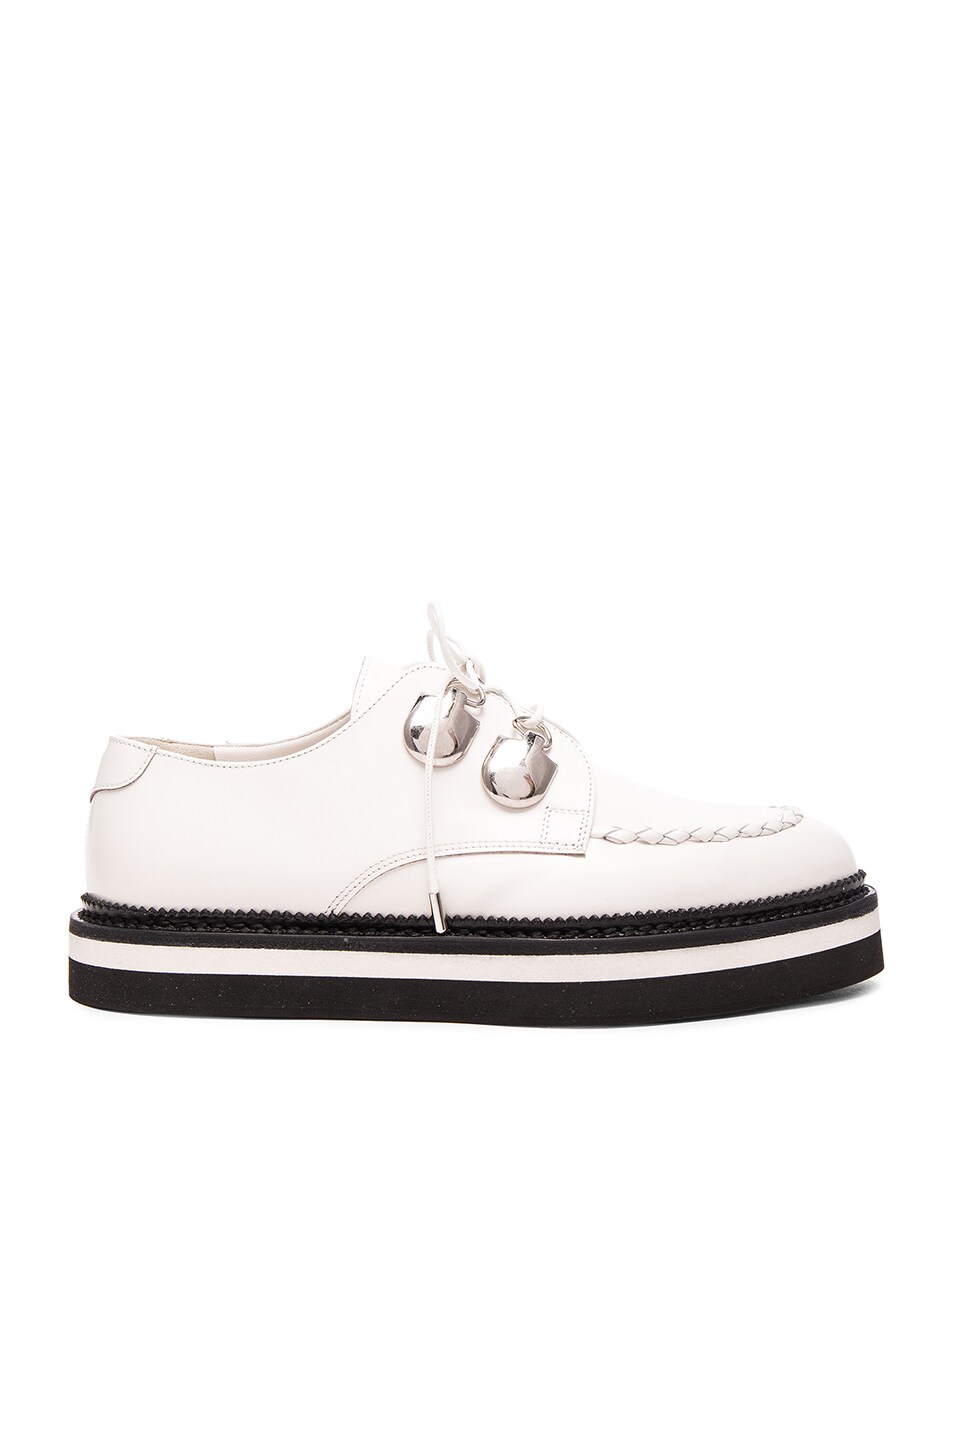 Image 1 of Alexander McQueen Leather Creepers in Ivory